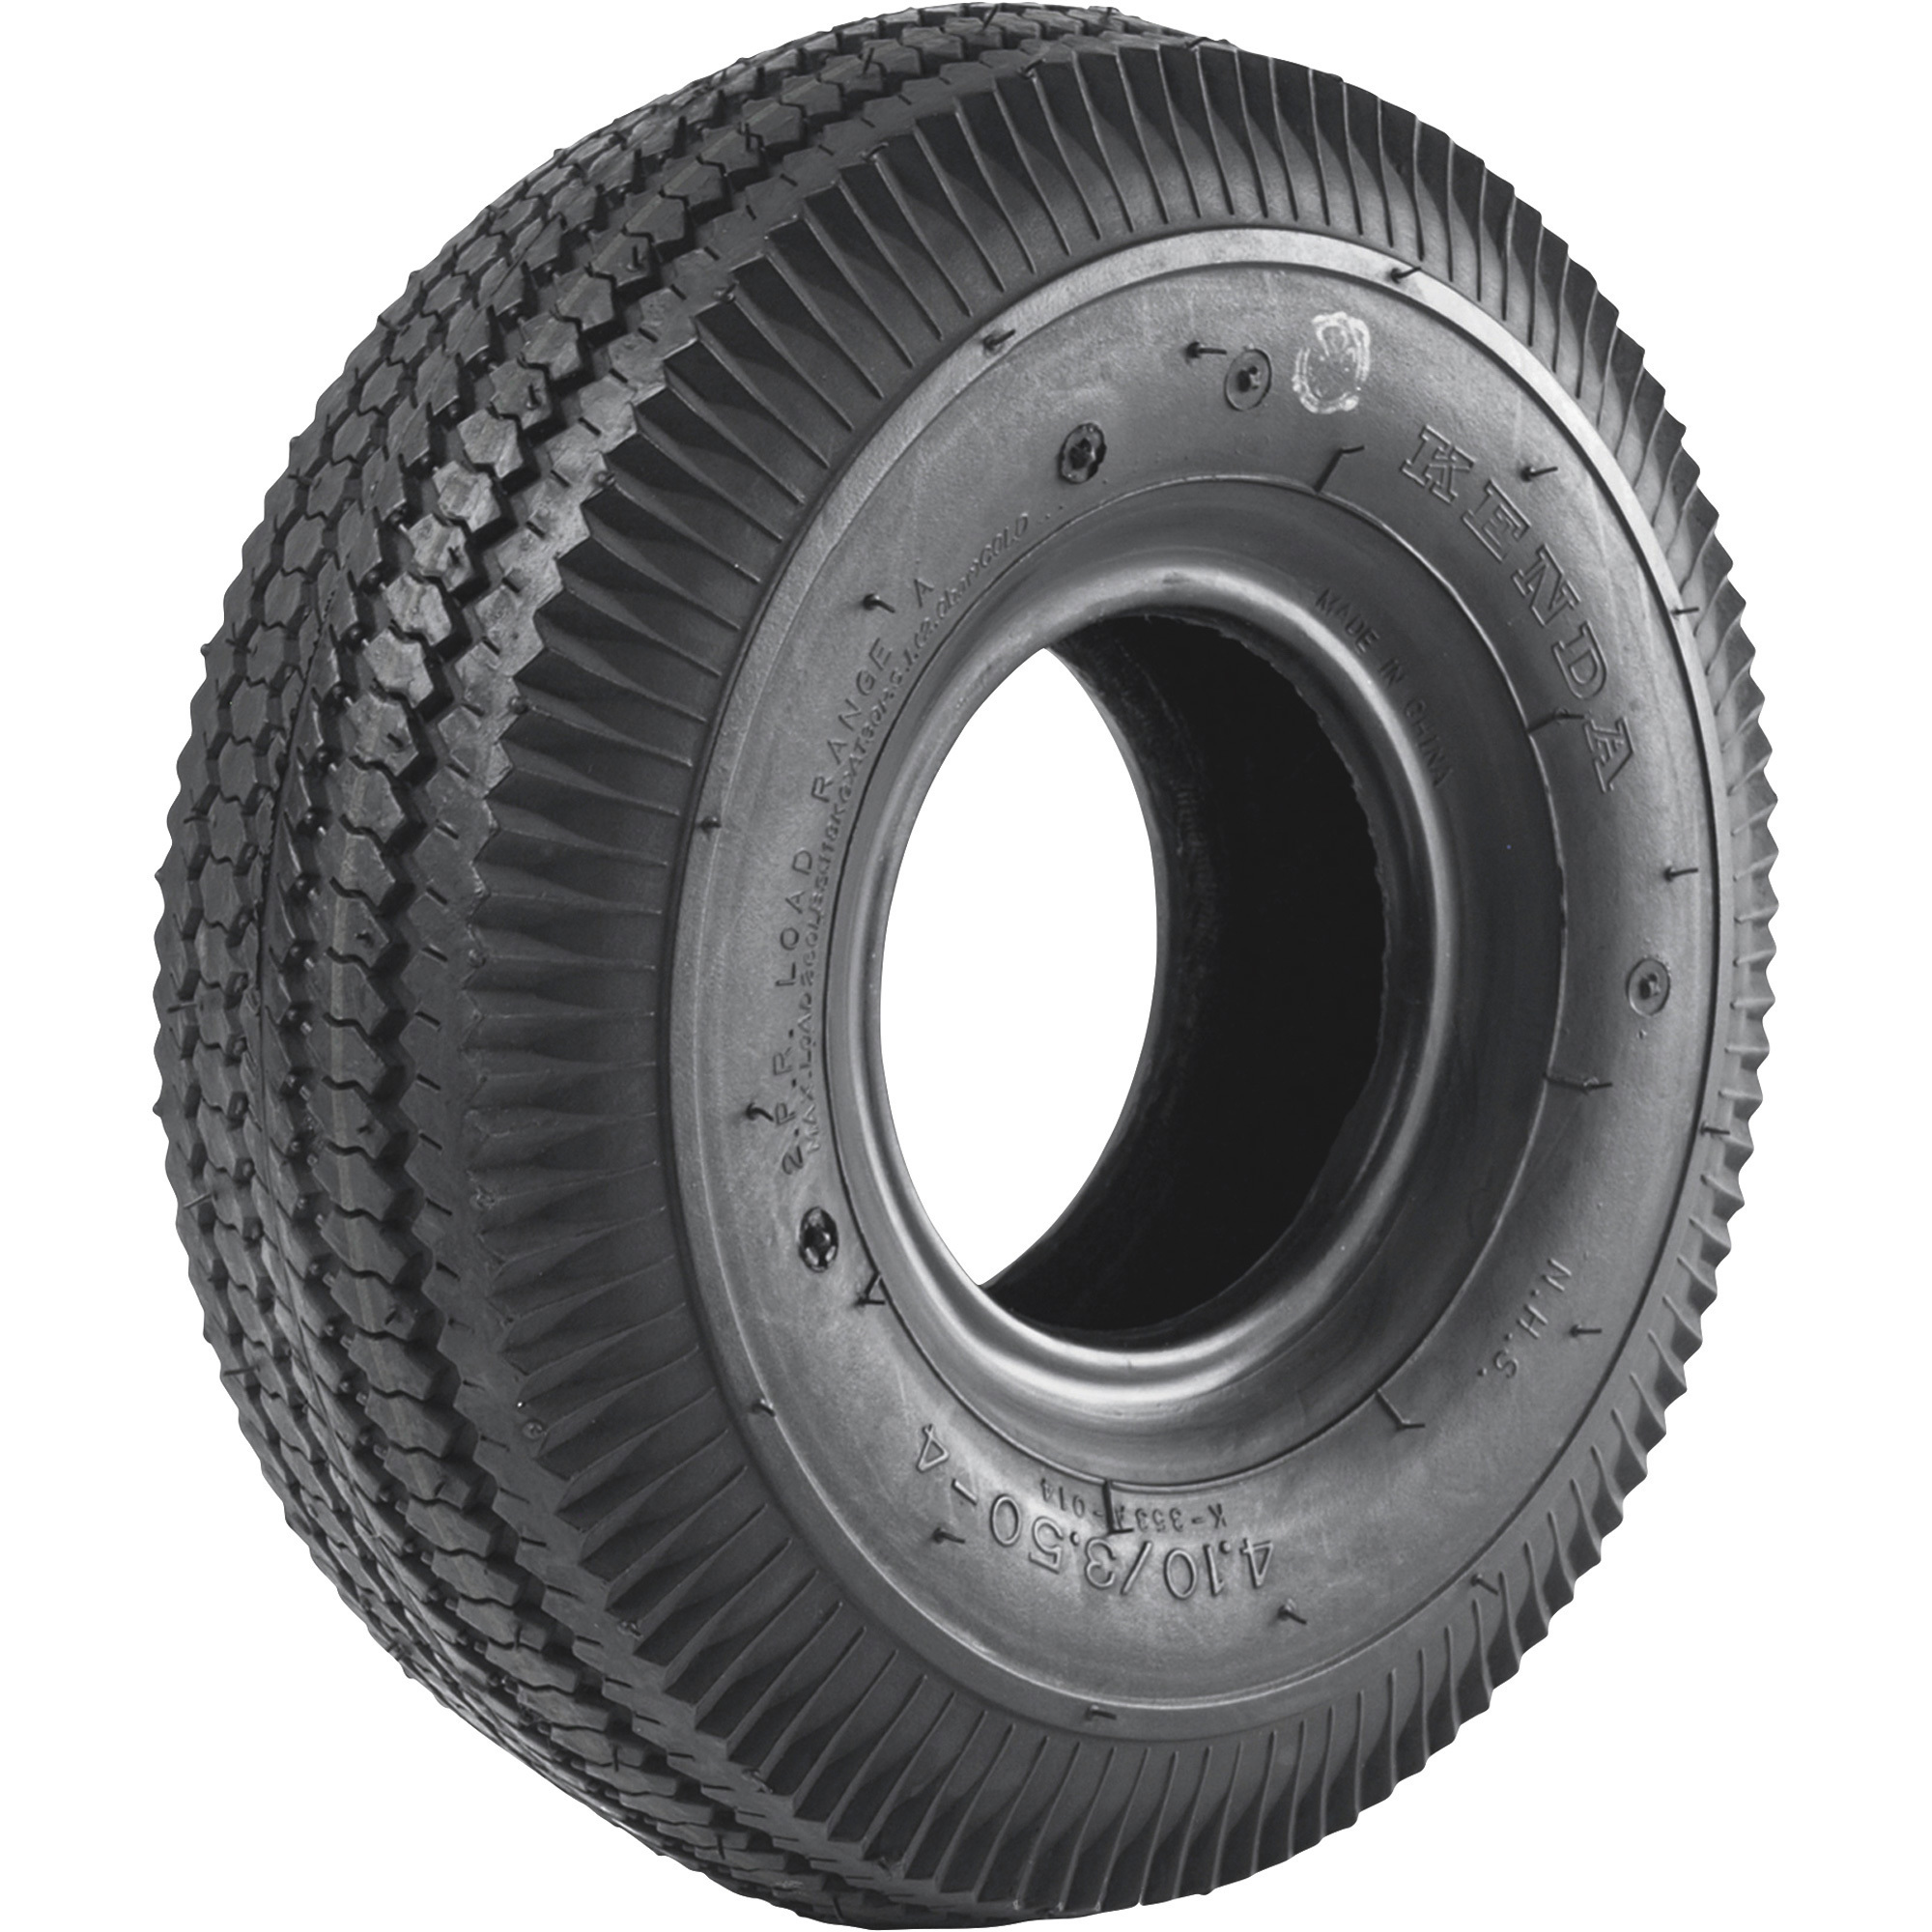 2-Ply Sawtooth Tread Replacement Tubeless Tire for Pneumatic Assemblies â 10.5Inch x 410/350 x 4